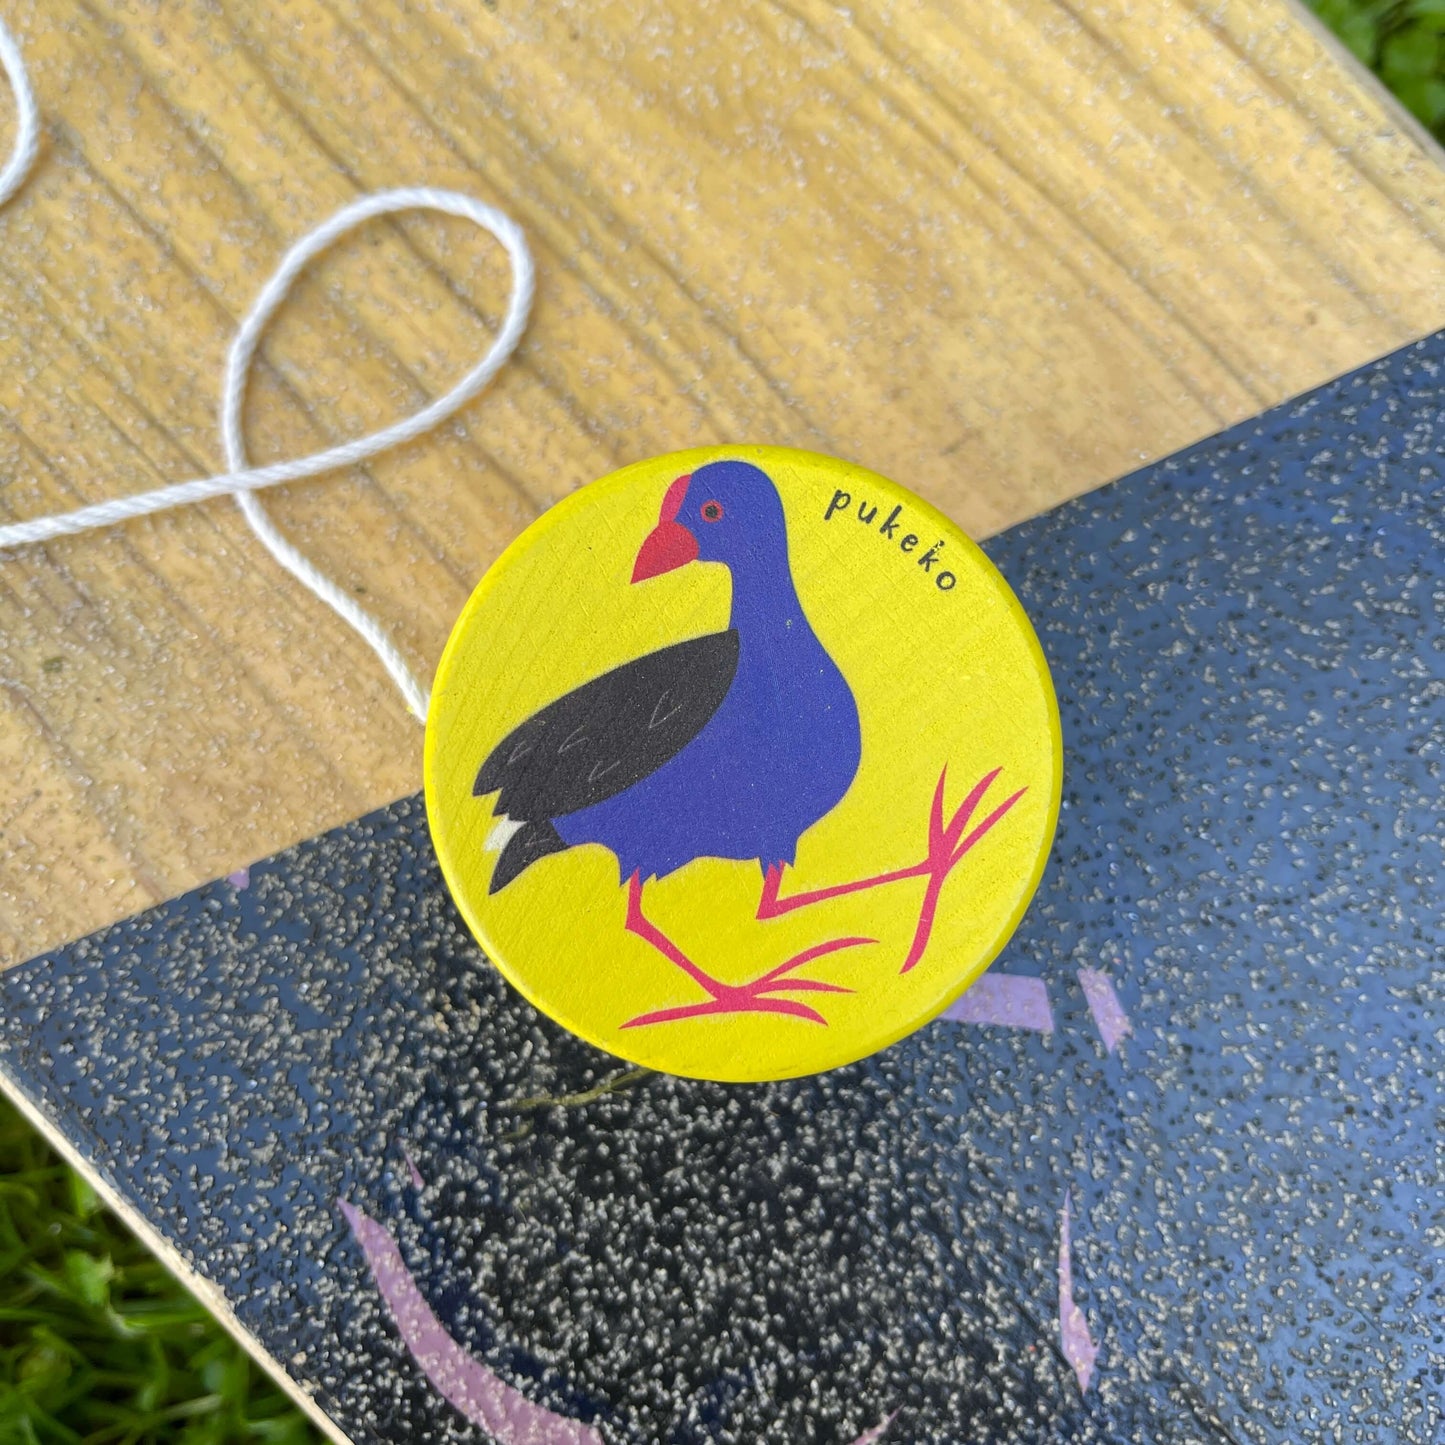 Bright yellow wooden yoyo with a Pukeko bird painted on it sitting on a skateboard.